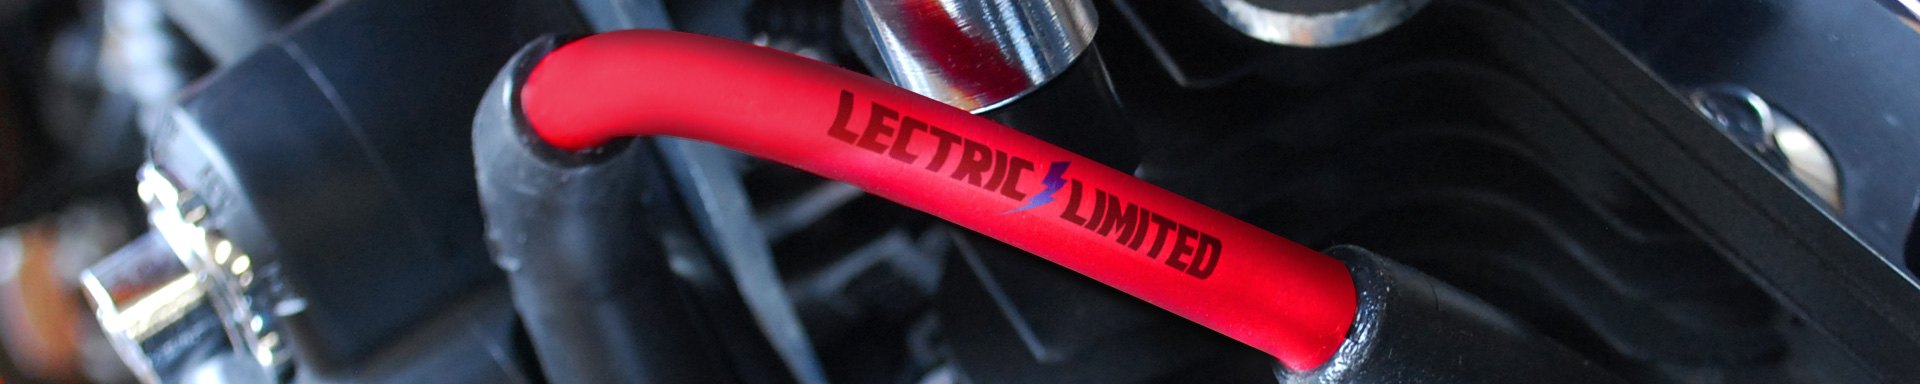 Lectric Limited Transmission